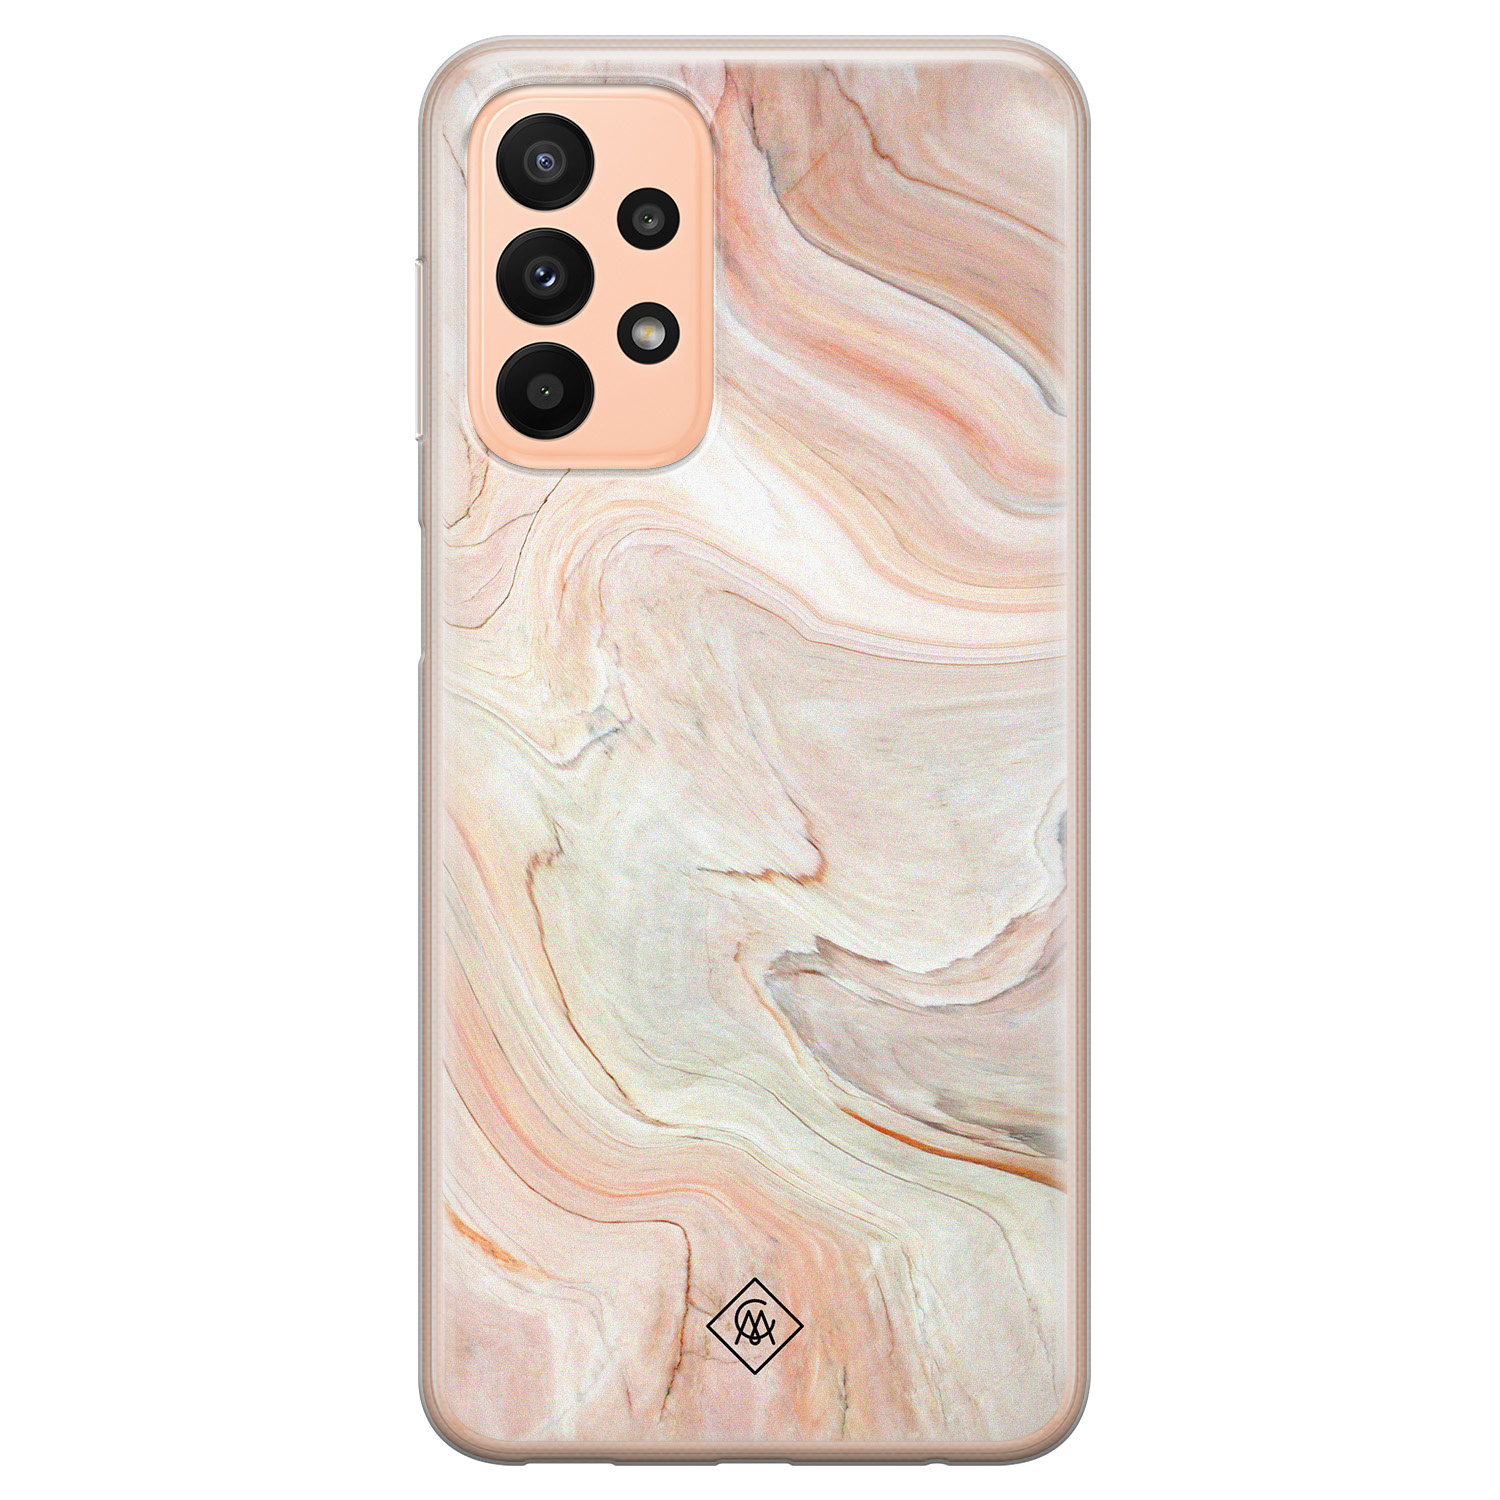 Samsung A23 hoesje siliconen - Marmer waves | Samsung Galaxy A23 case | Bruin/beige | TPU backcover transparant